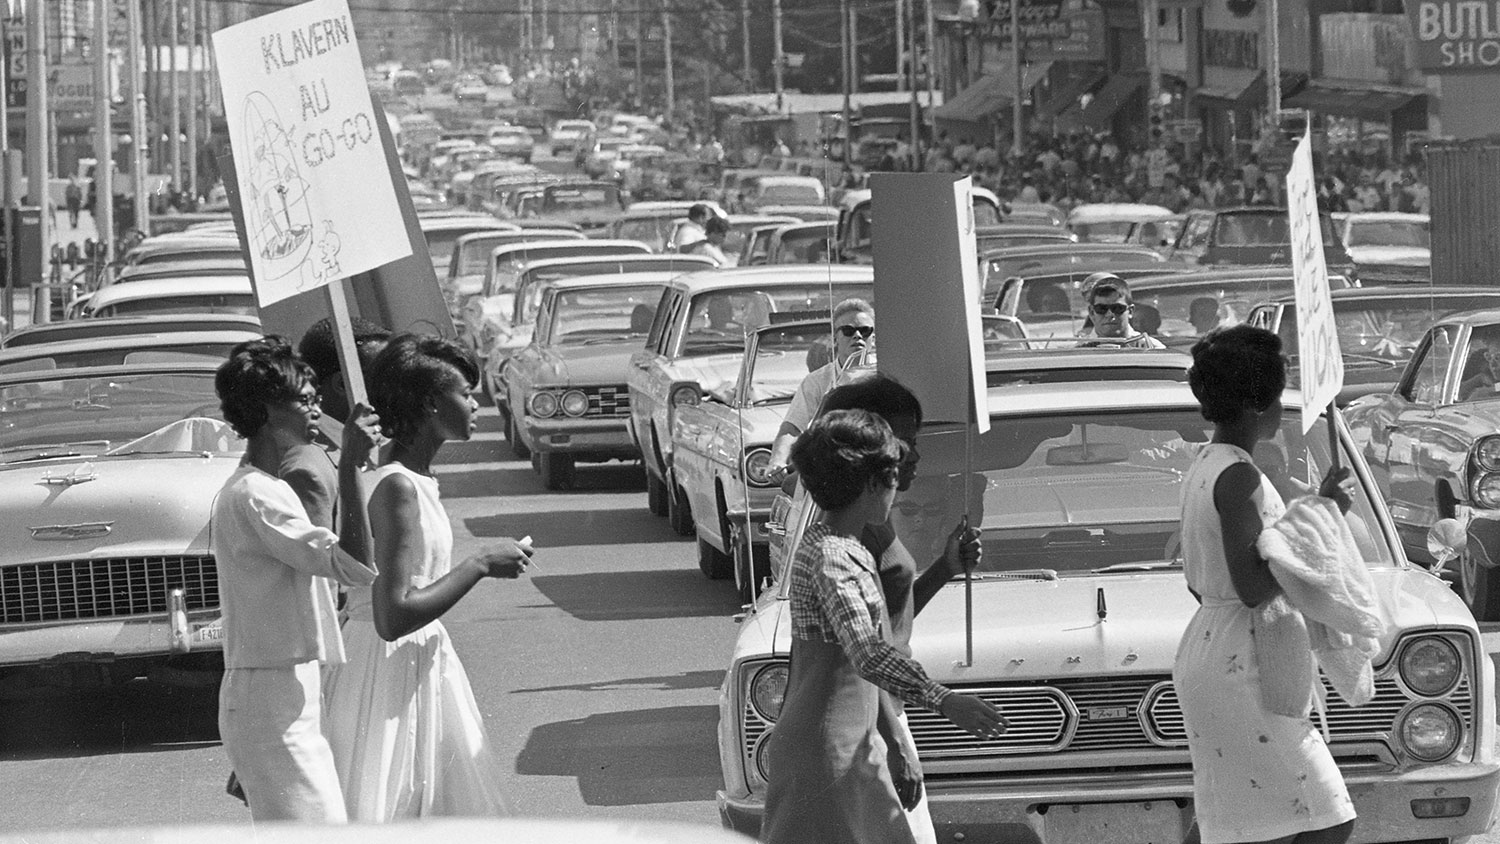 Protesters march during a Ku Klux Klan rally in downtown Raleigh, one of the never-before-published photos that will be on display at the African American Cultural Center Art Gallery next Wednesday. [Photo courtesy of State Archives of North Carolina].